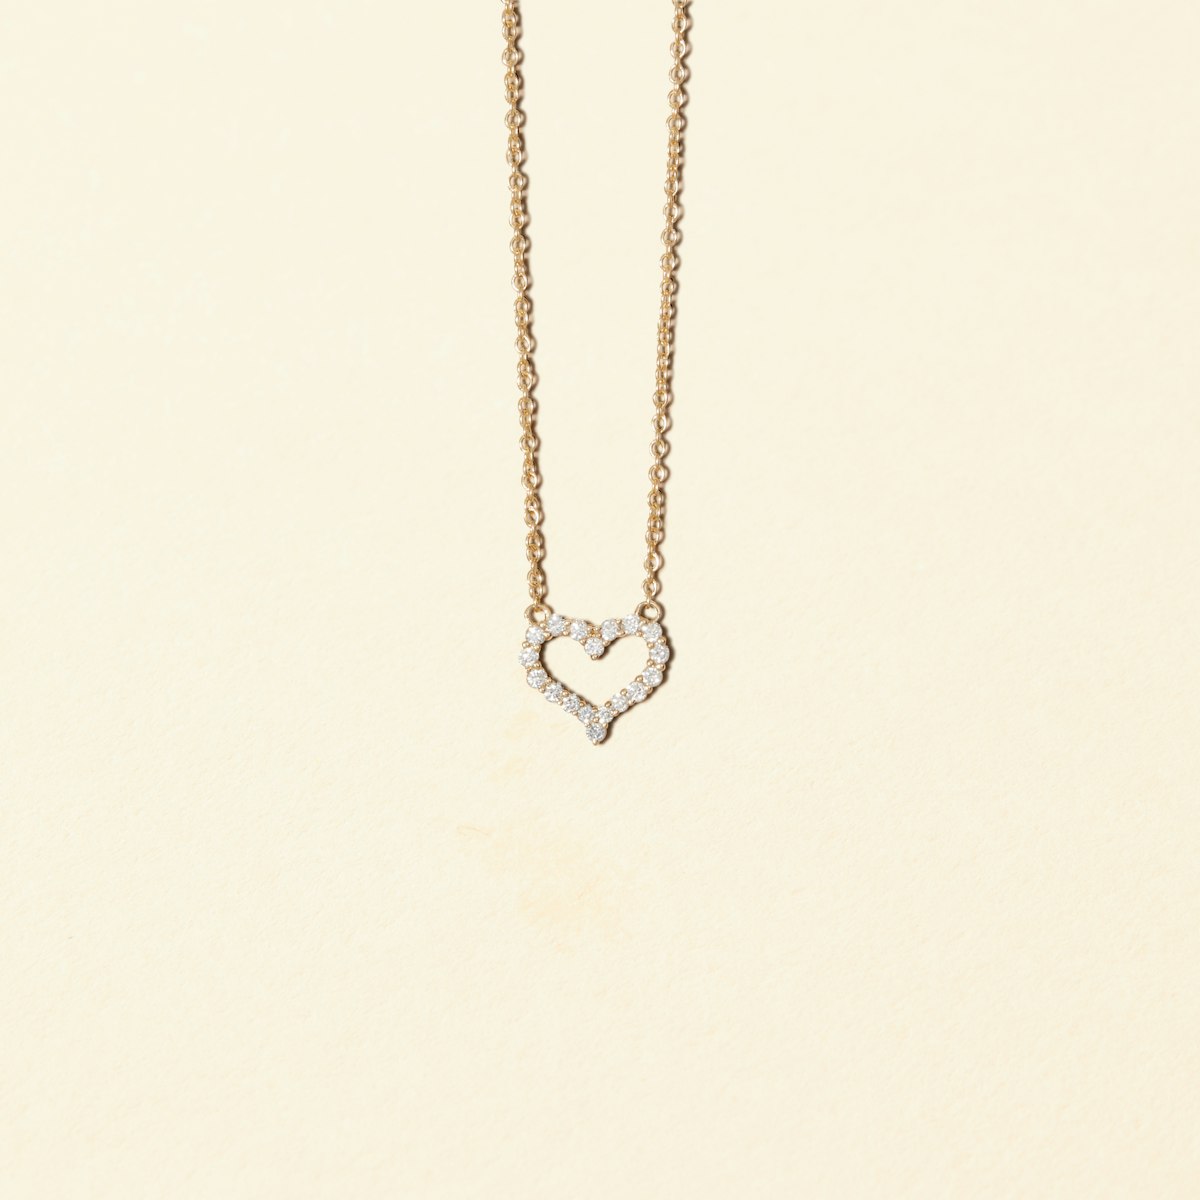 Swoon Diamond Heart Necklace_Yellow Gold_Jewelry_Product_1x1_2484.jpg